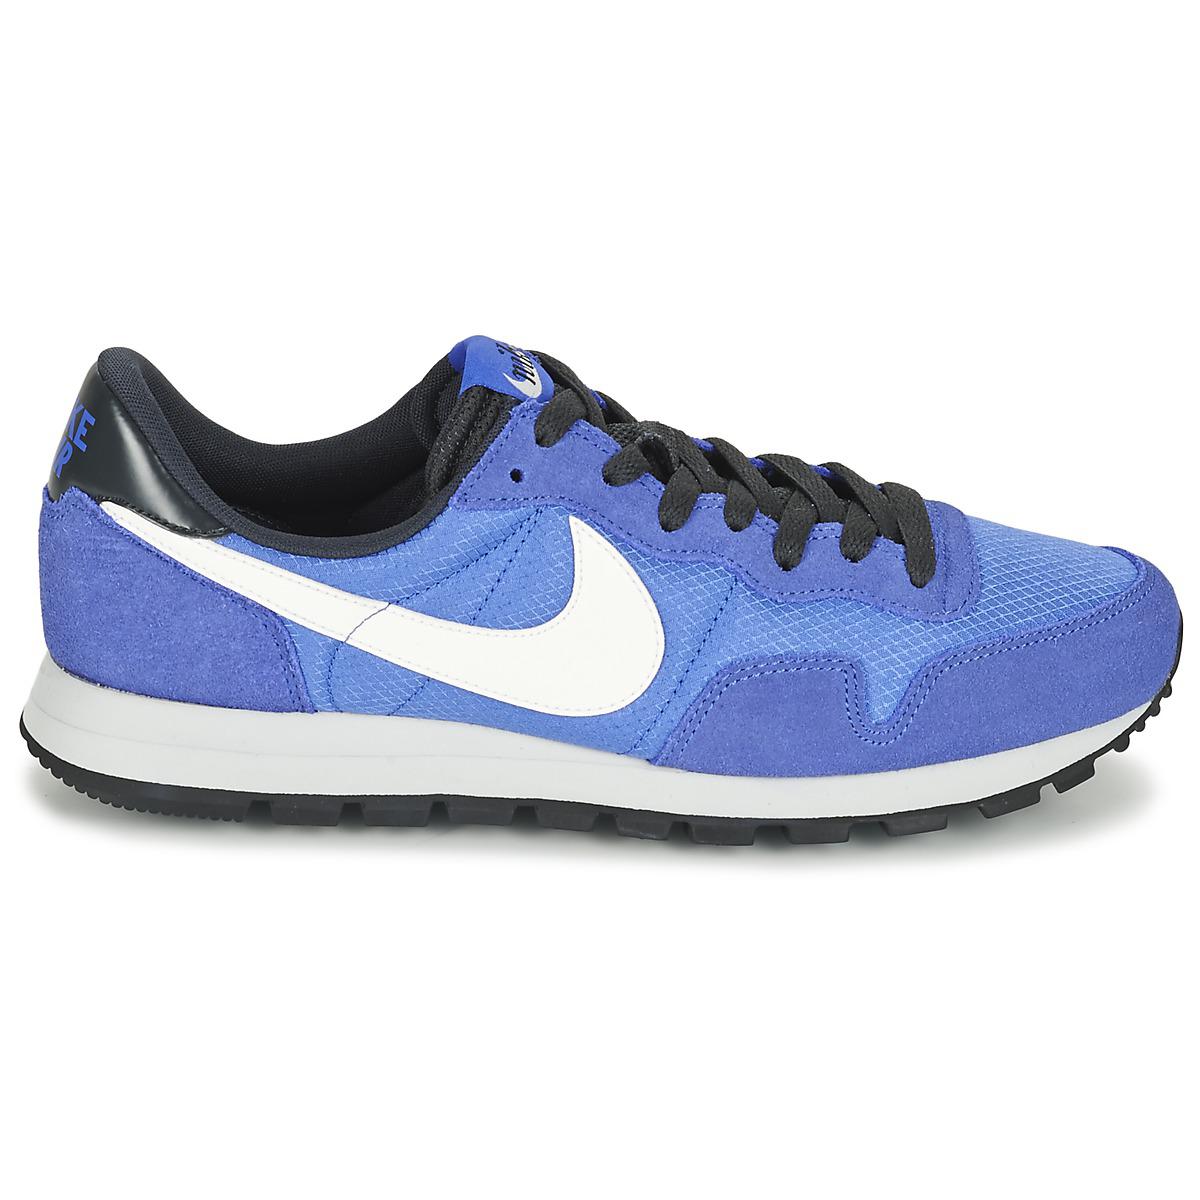 Nike Air Pegasus 83 Shoes (trainers) in Blue for Men - Lyst